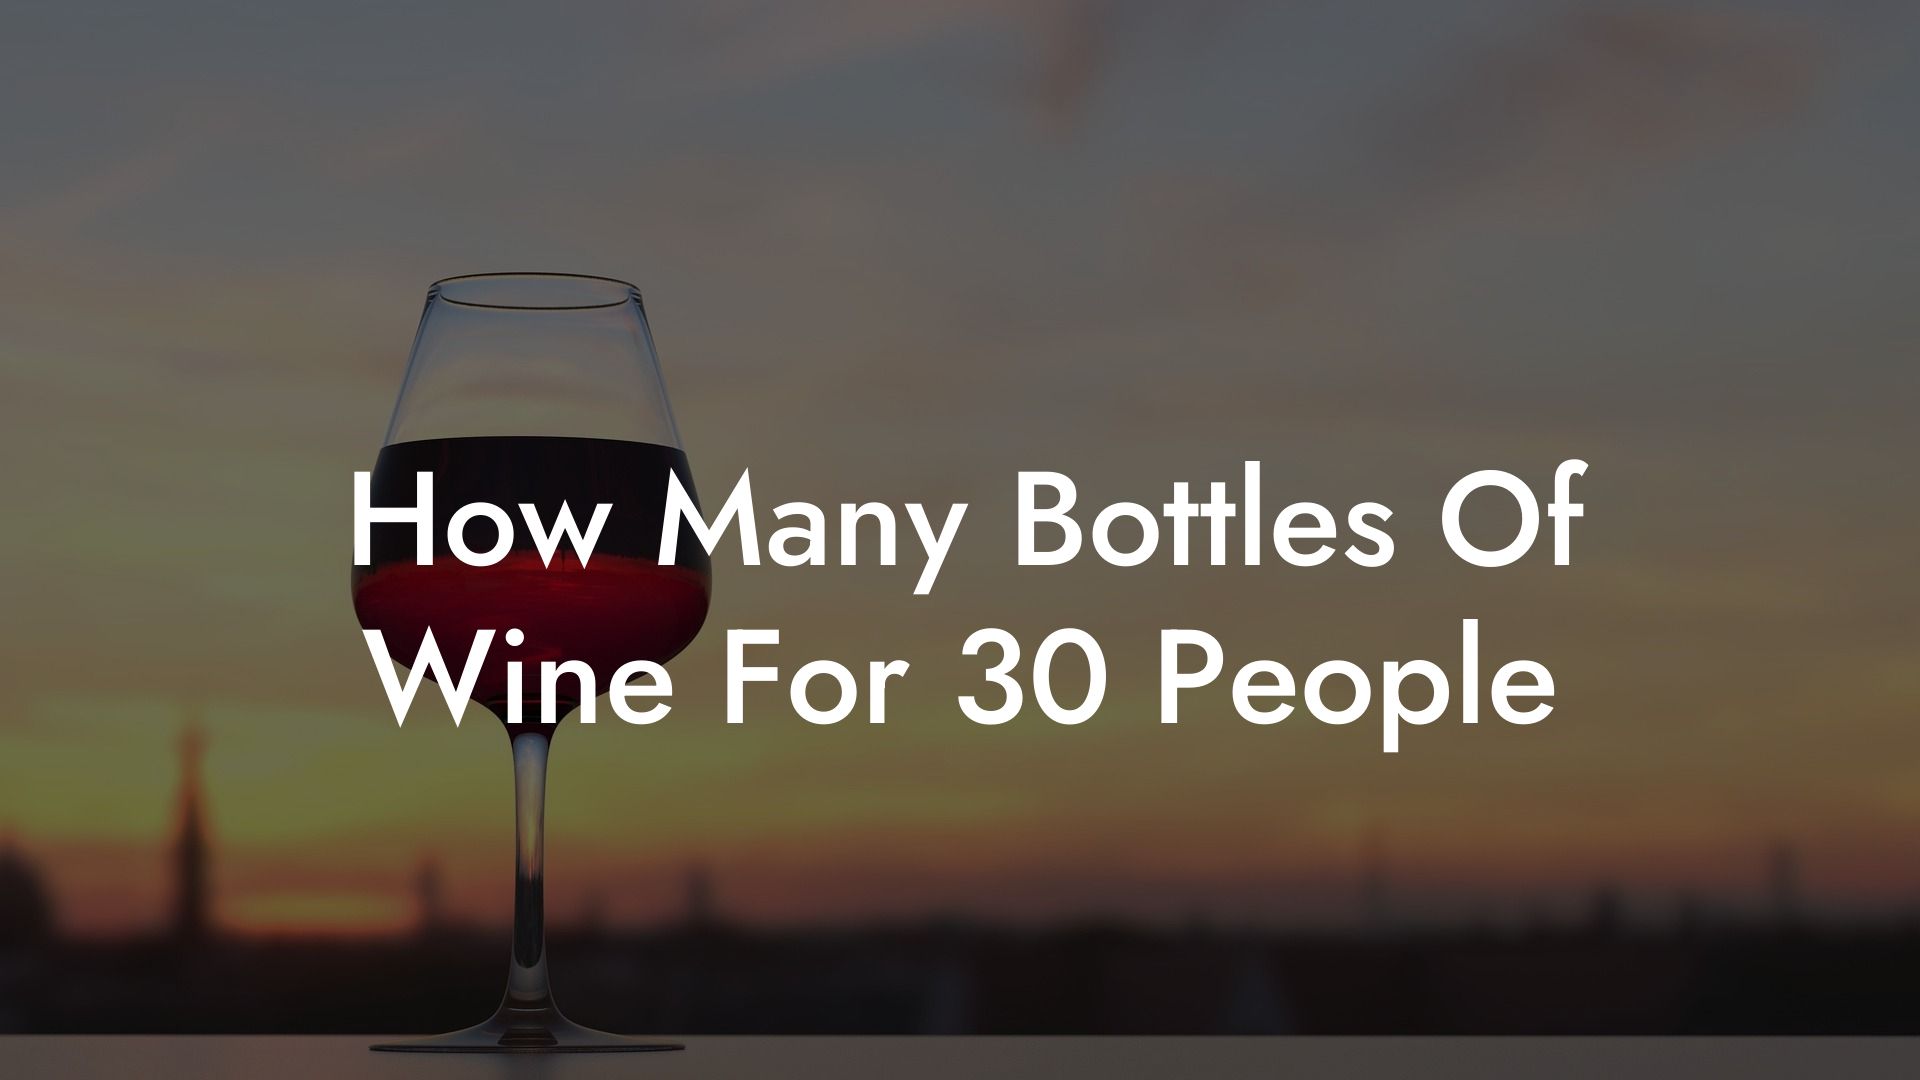 How Many Bottles Of Wine For 30 People